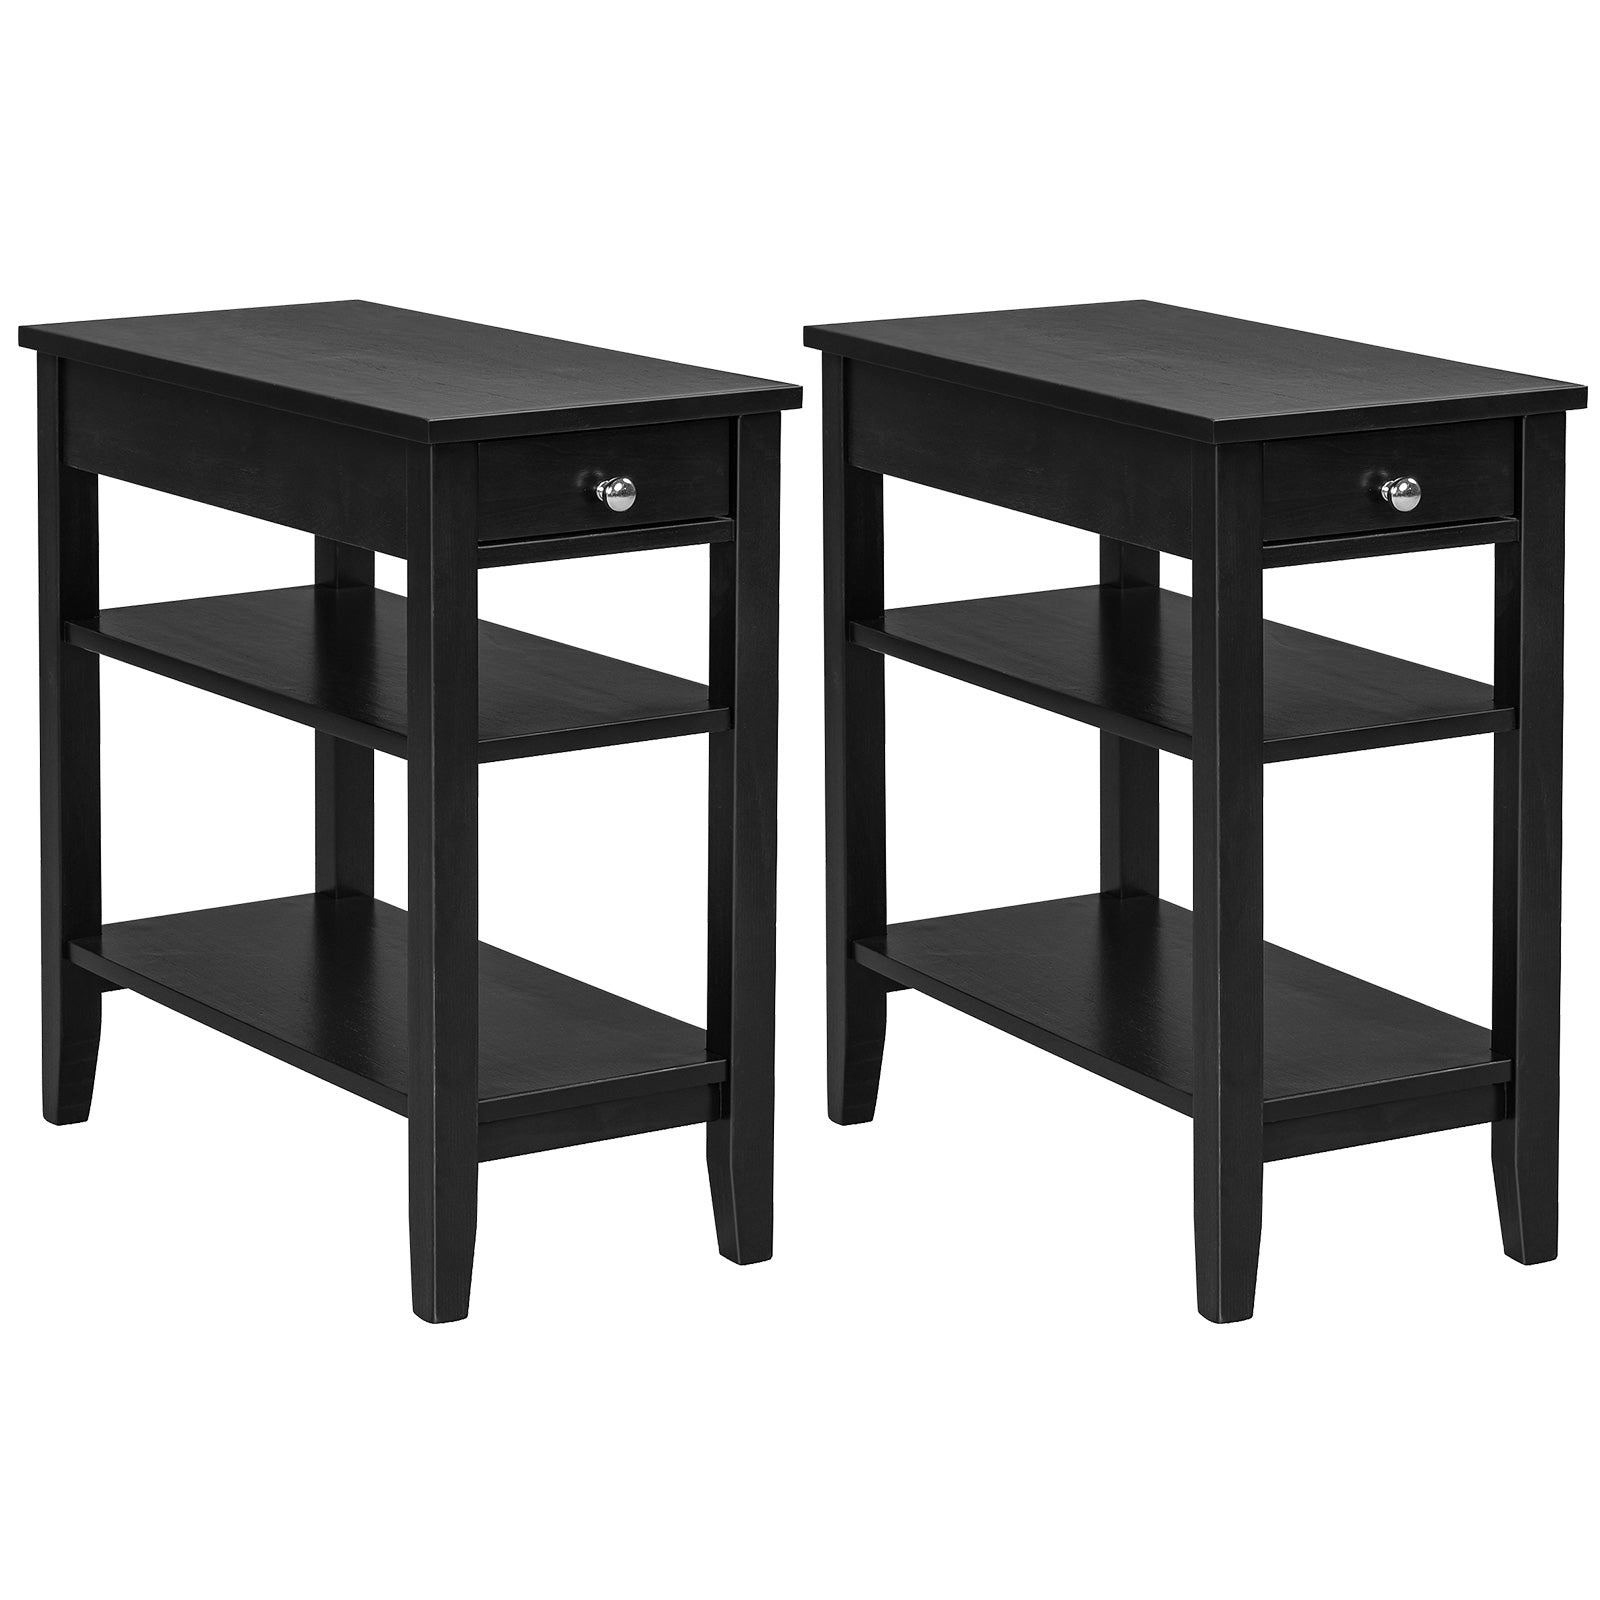 Giantex End Table Sofa Side Table with Drawer, 3-Tier Nightstand with Storage Shelves